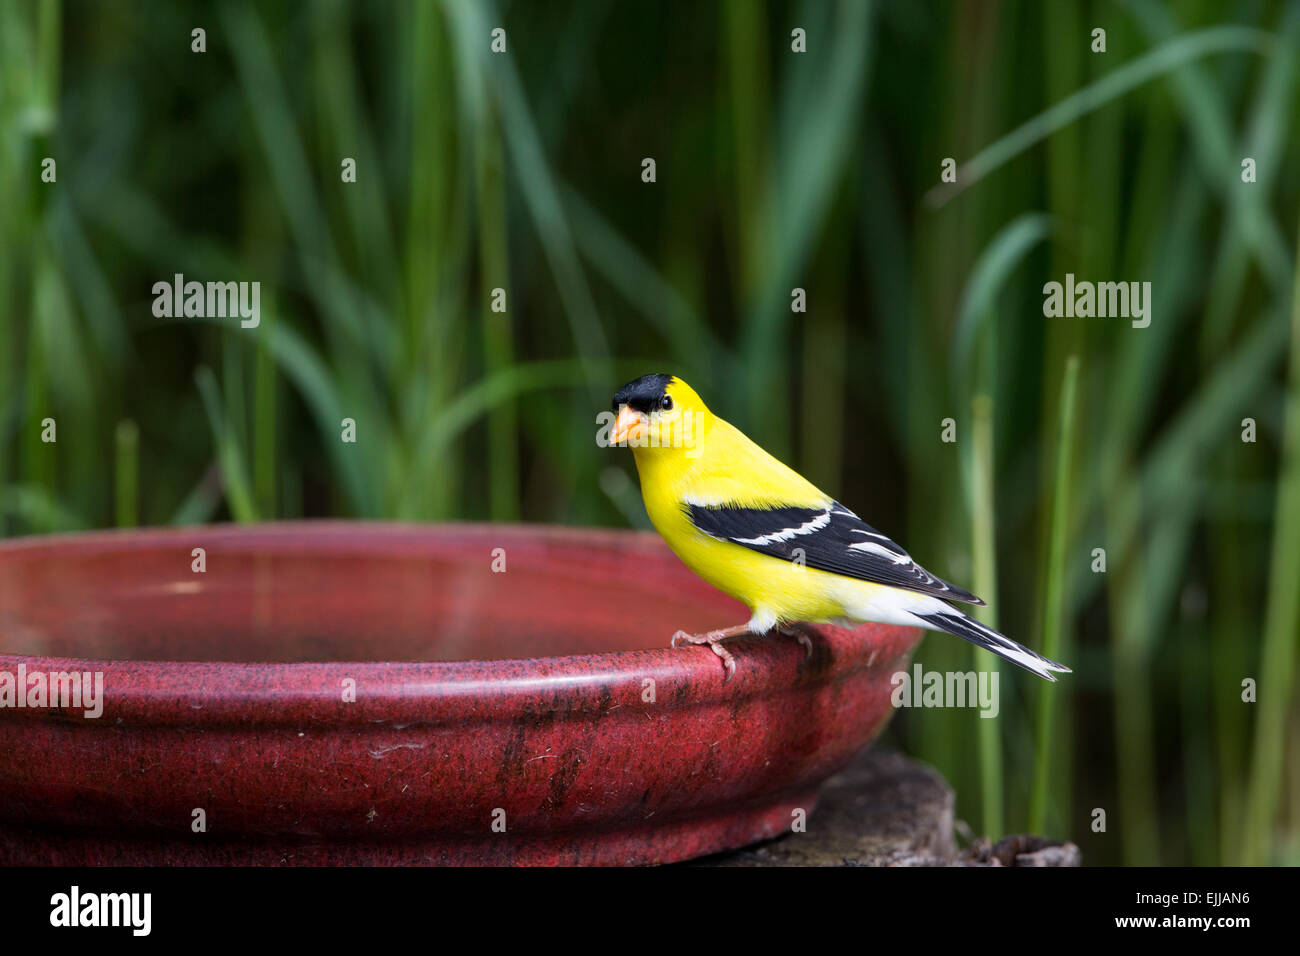 Male American goldfinch perched on a bird bath Stock Photo